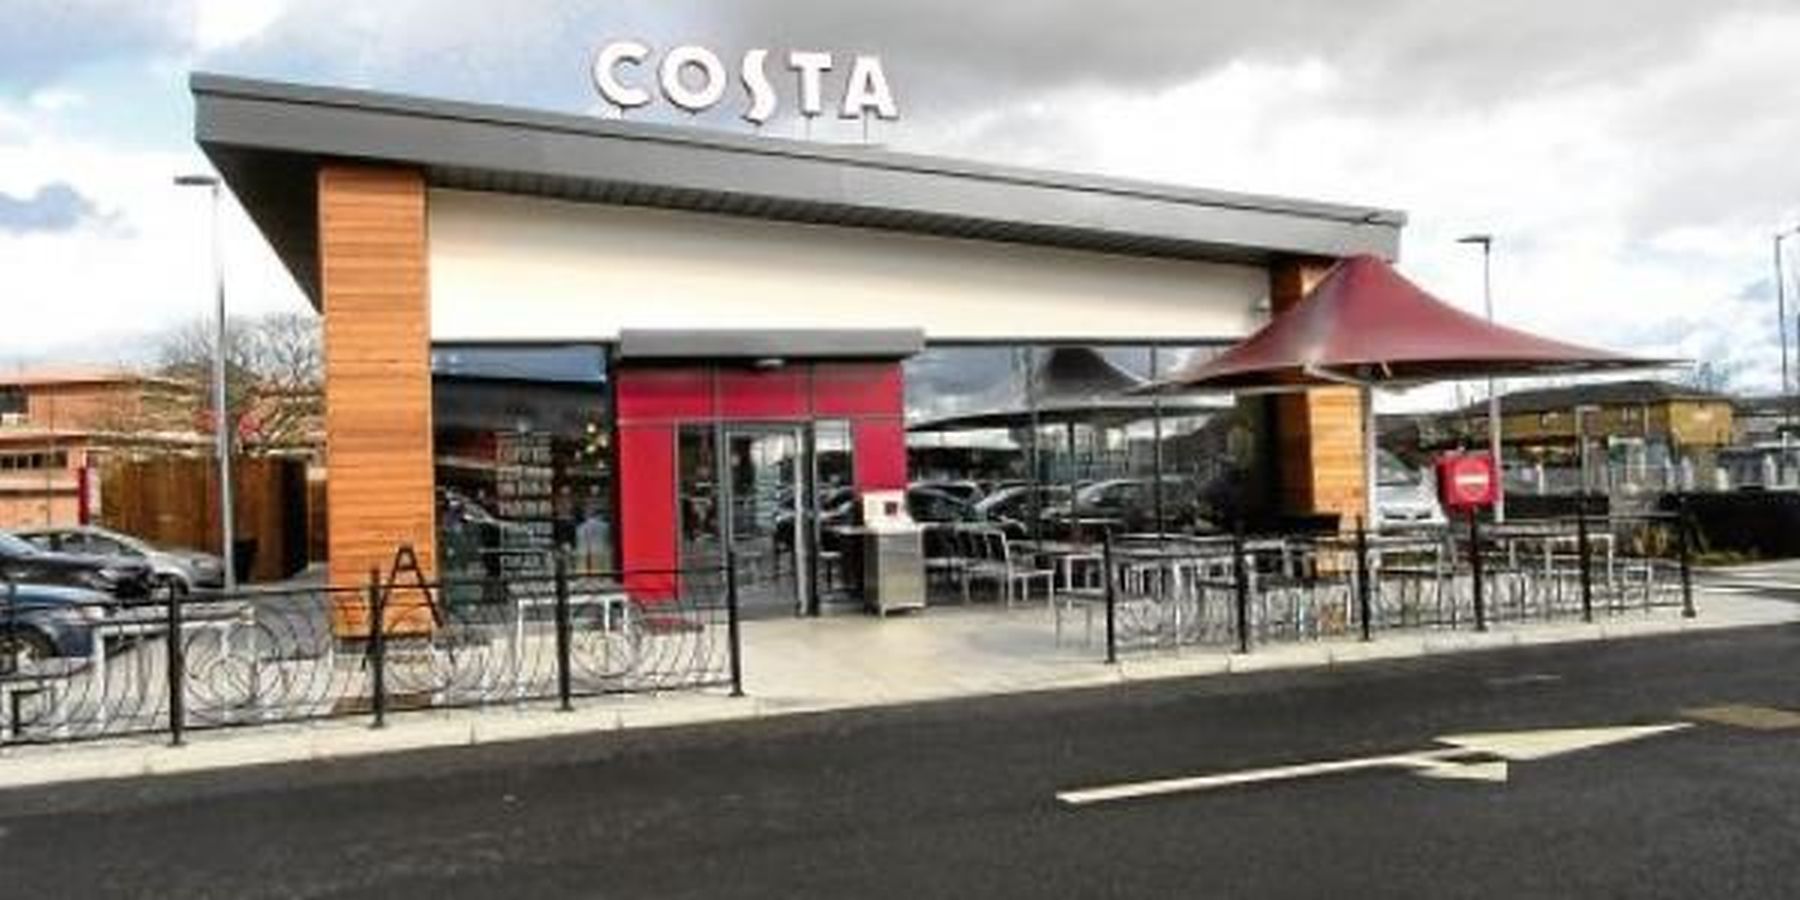 Work completed on Ryden-advised new Costa Coffee drive-thru in Aberdeen Image